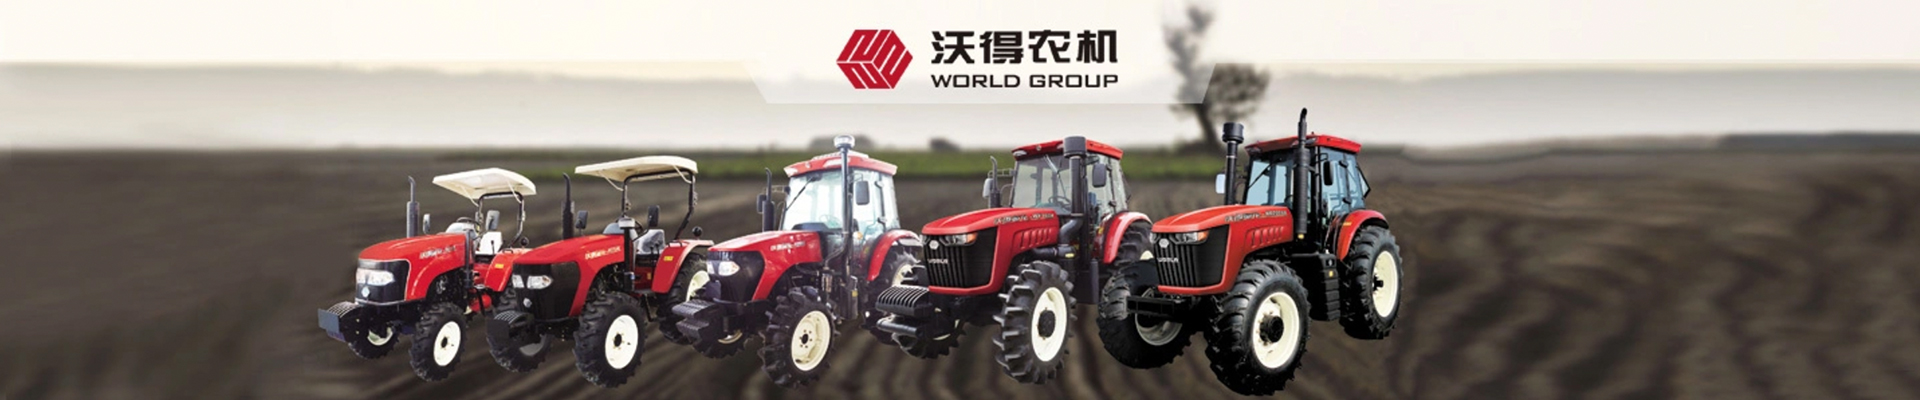 Multifunction Agriculture Tractors